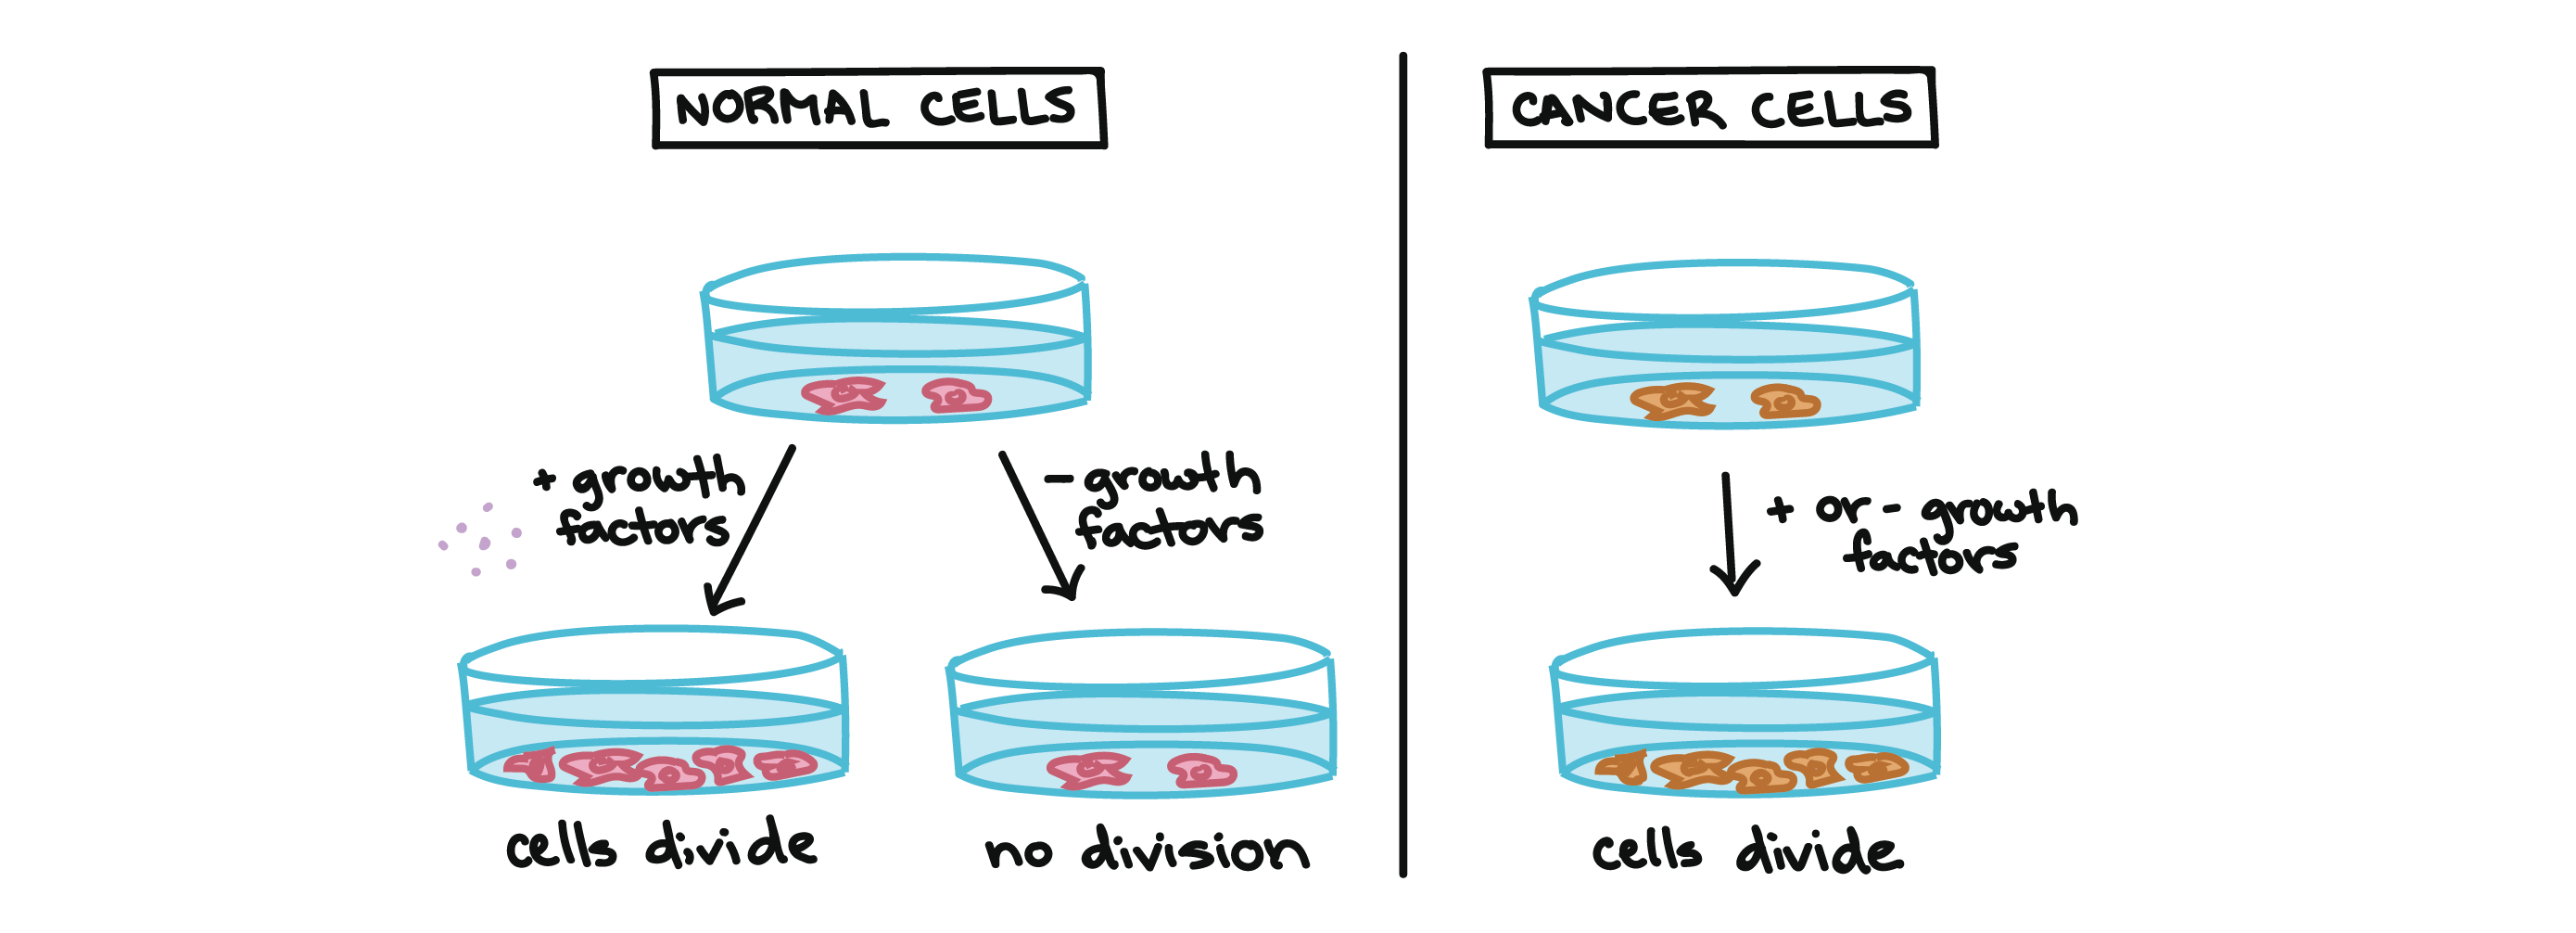 Diagram showing different responses of normal and cancer cells to growth factor presence or absence.

- Normal cells in a culture dish will not divide without the addition of growth factors.

- Cancer cells in a culture dish will divide whether growth factors are provided or not.